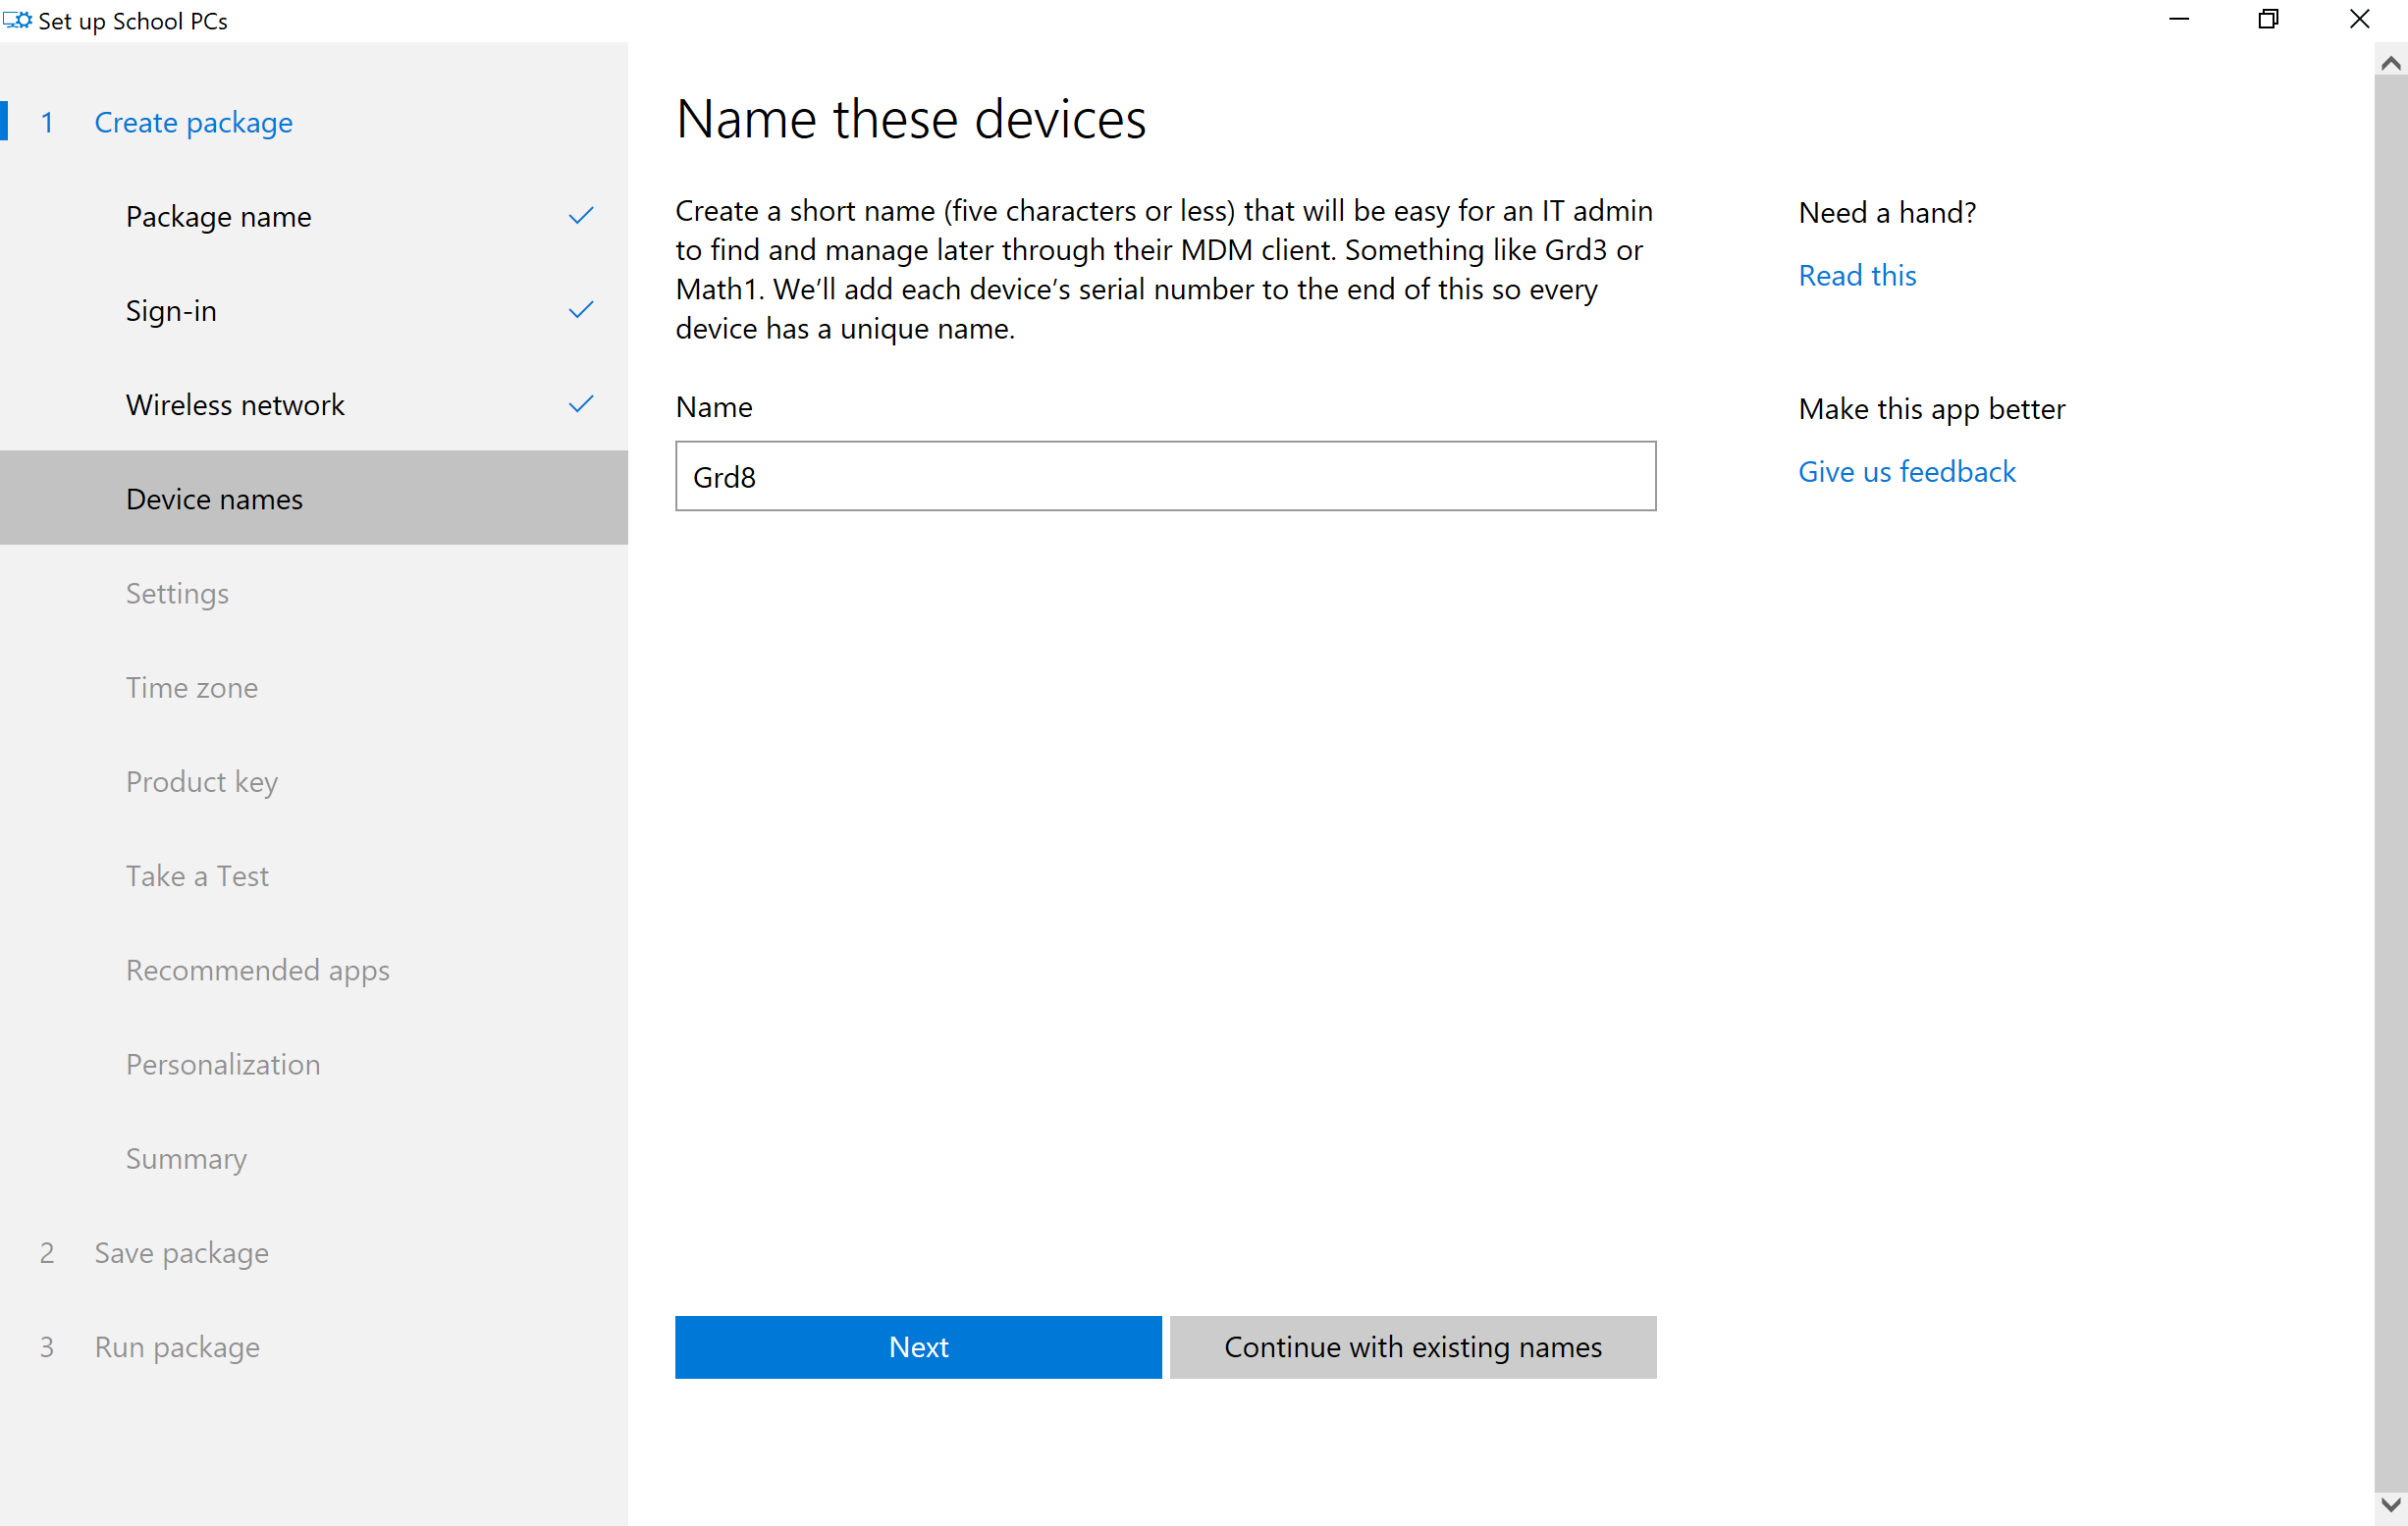 "Name these devices" screen with the device field filled in with example device name, "Grd8."